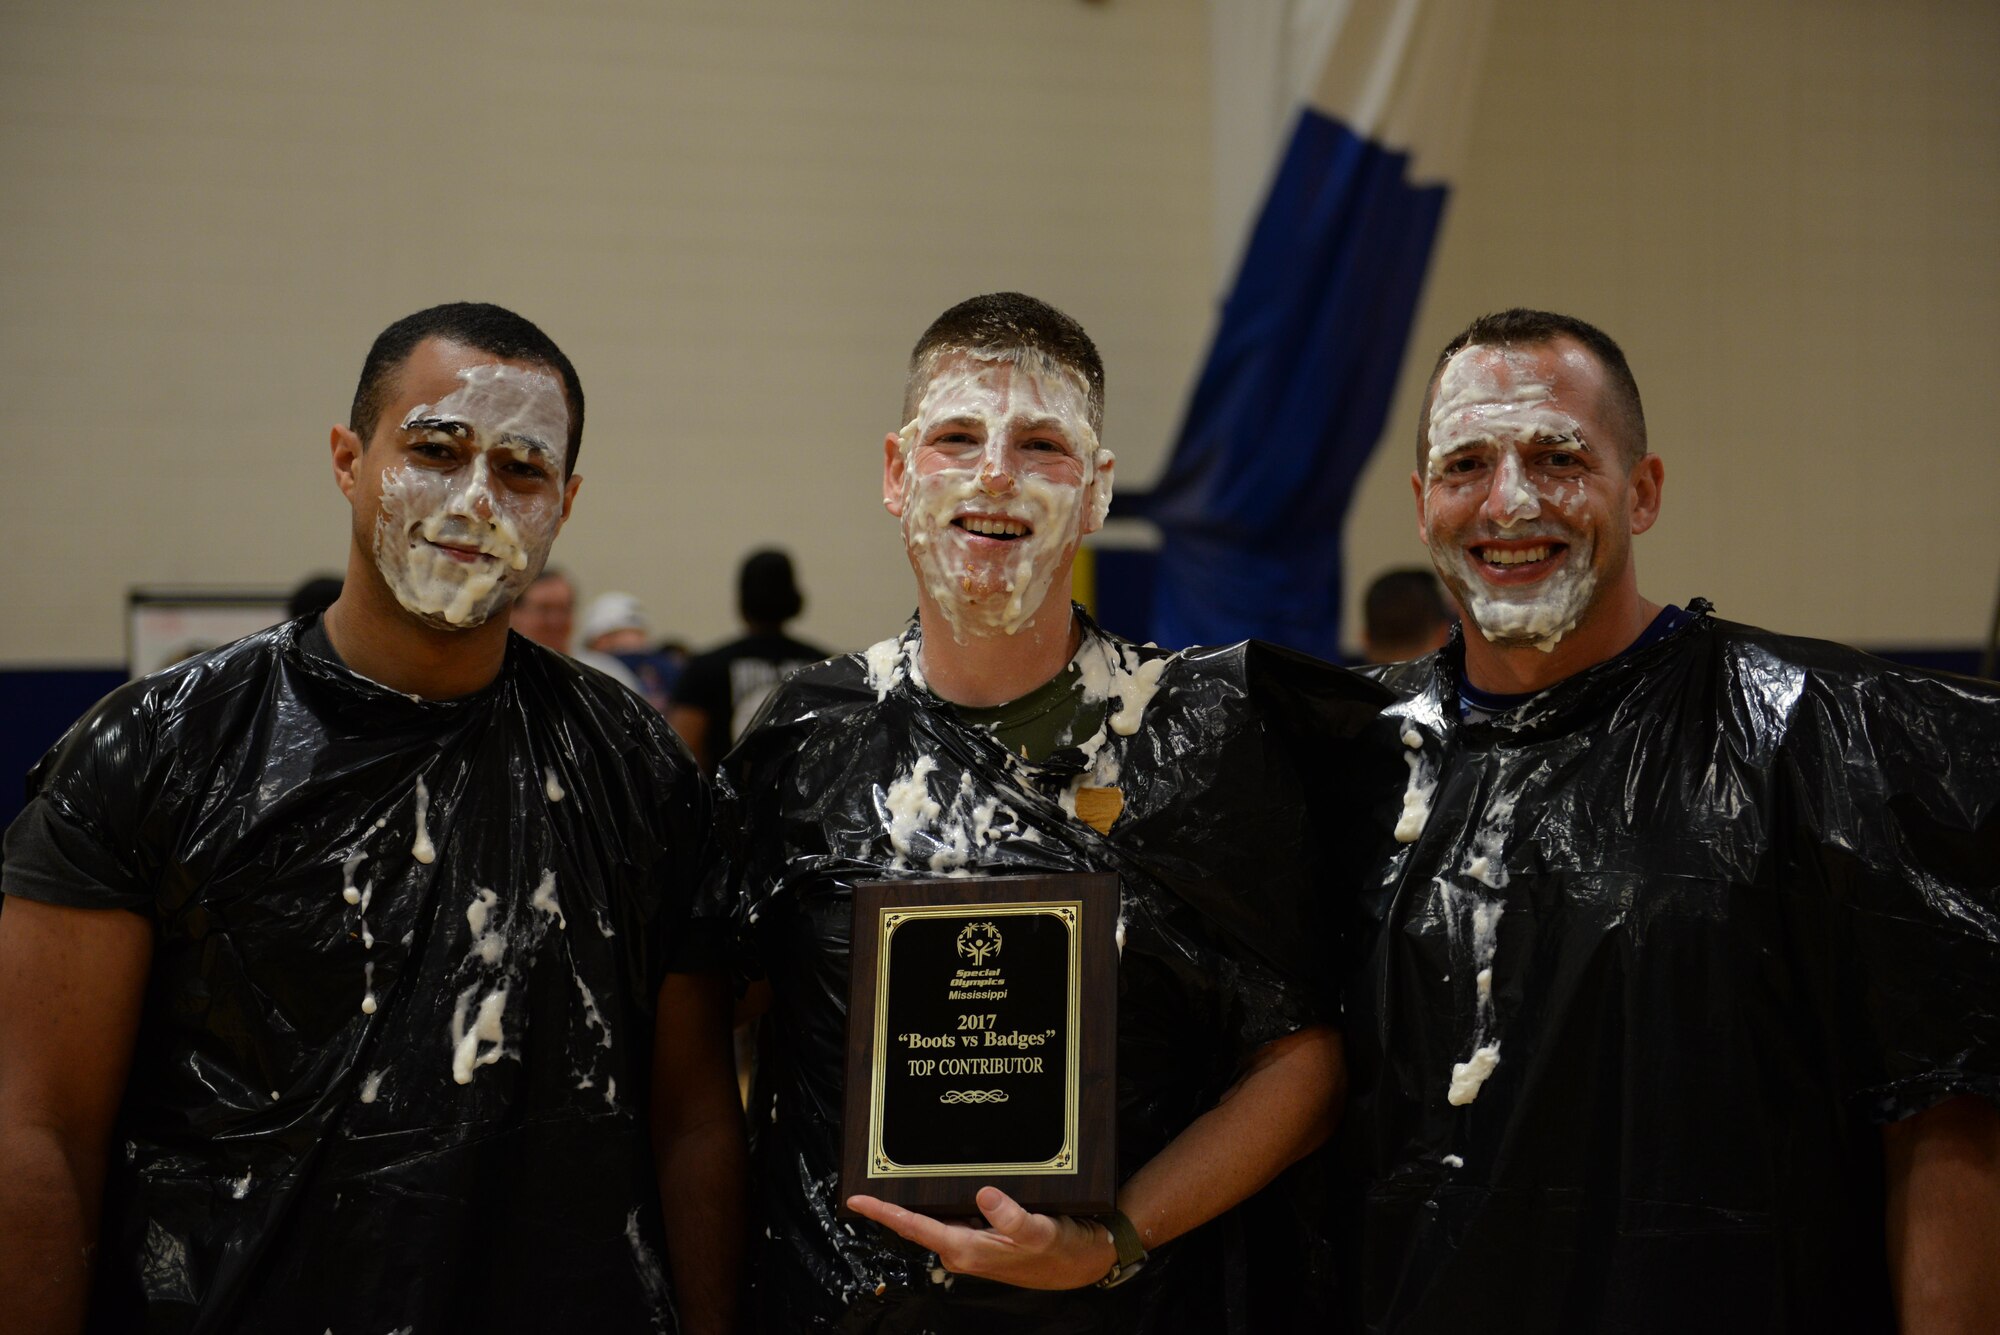 Airmen from the ‘Boots’ team pose for a photo after getting a pie in the face after the Boots vs. Badges volleyball game at the Blake Fitness Center, May 13, 2017, on Keesler Air Force Base, Miss. Keesler Airmen competed against City of Biloxi police officers and firefighters as the starting event for the 2017 Special Olympics Mississippi Summer Games, which will be hosted on base for the 31st year May 19-21. (U.S. Air Force photo by Senior Airman Duncan McElroy)